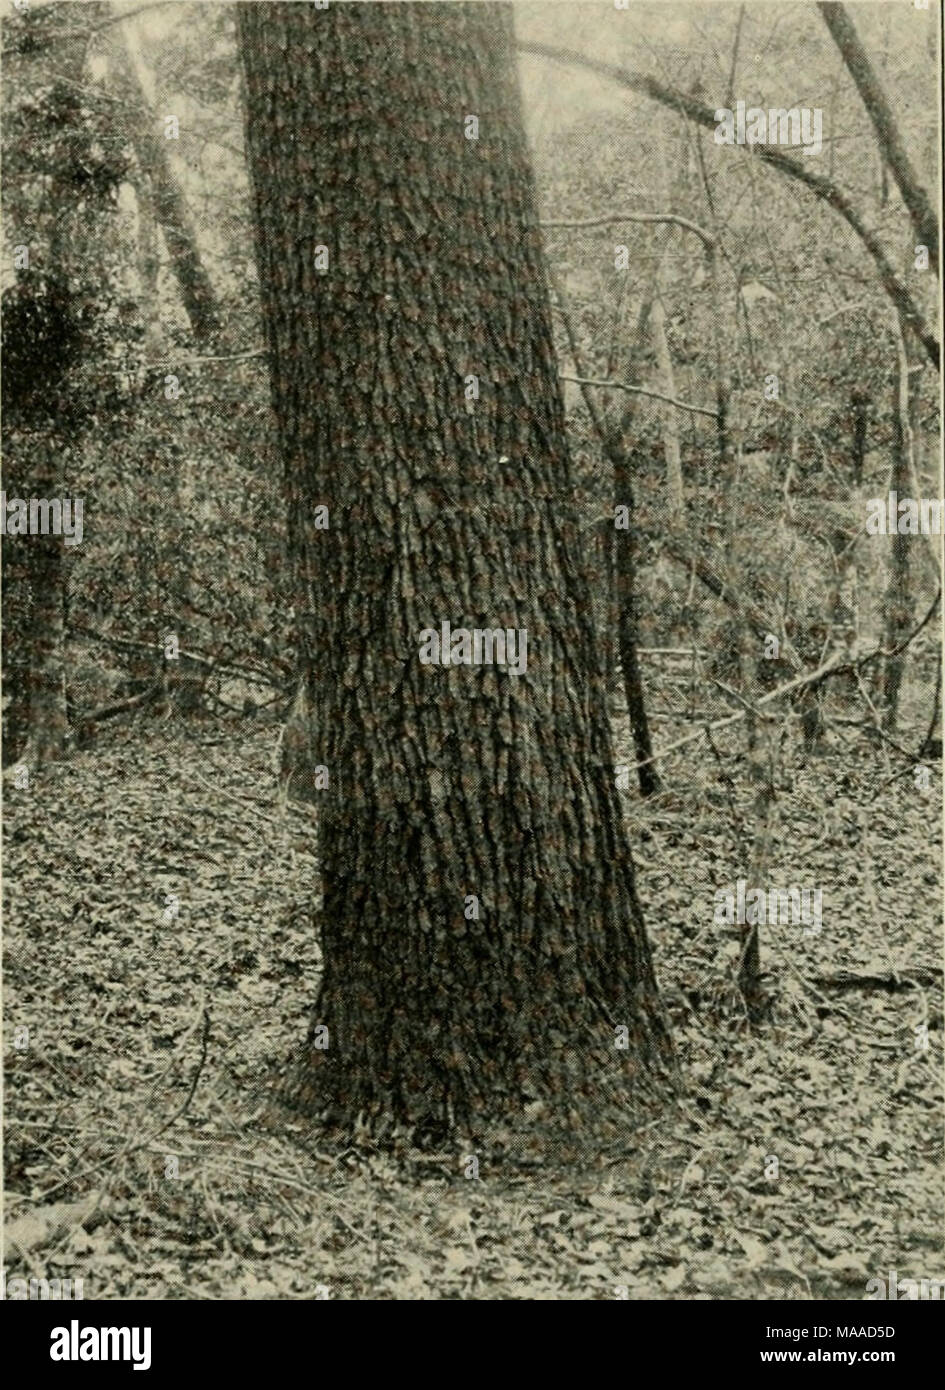 . Economic botany of Alabama . Fig. 11. Trunk of Piinis glabra. 30 inches in diameter, in creek bot- toms about four miles east of Ozark, Dale County, December 12, 1905. 6C. Autauga, Elmore, Macon, and probably Russell County; rather rare. 7. Occasional in creek bottoms, Dallas, Montgomery and Bullock Counties. 8. Common in creek bottoms throughout. lOE. Frequent in creek and river bottoms. low. Common in ravines and bottoms, up to the northern edge of Choctaw County and presumably the southwest corner of Sumter. 11. Ravines, bluffs, etc.; common. 12. Hammocks, etc.; not common. 13. Occasional Stock Photo